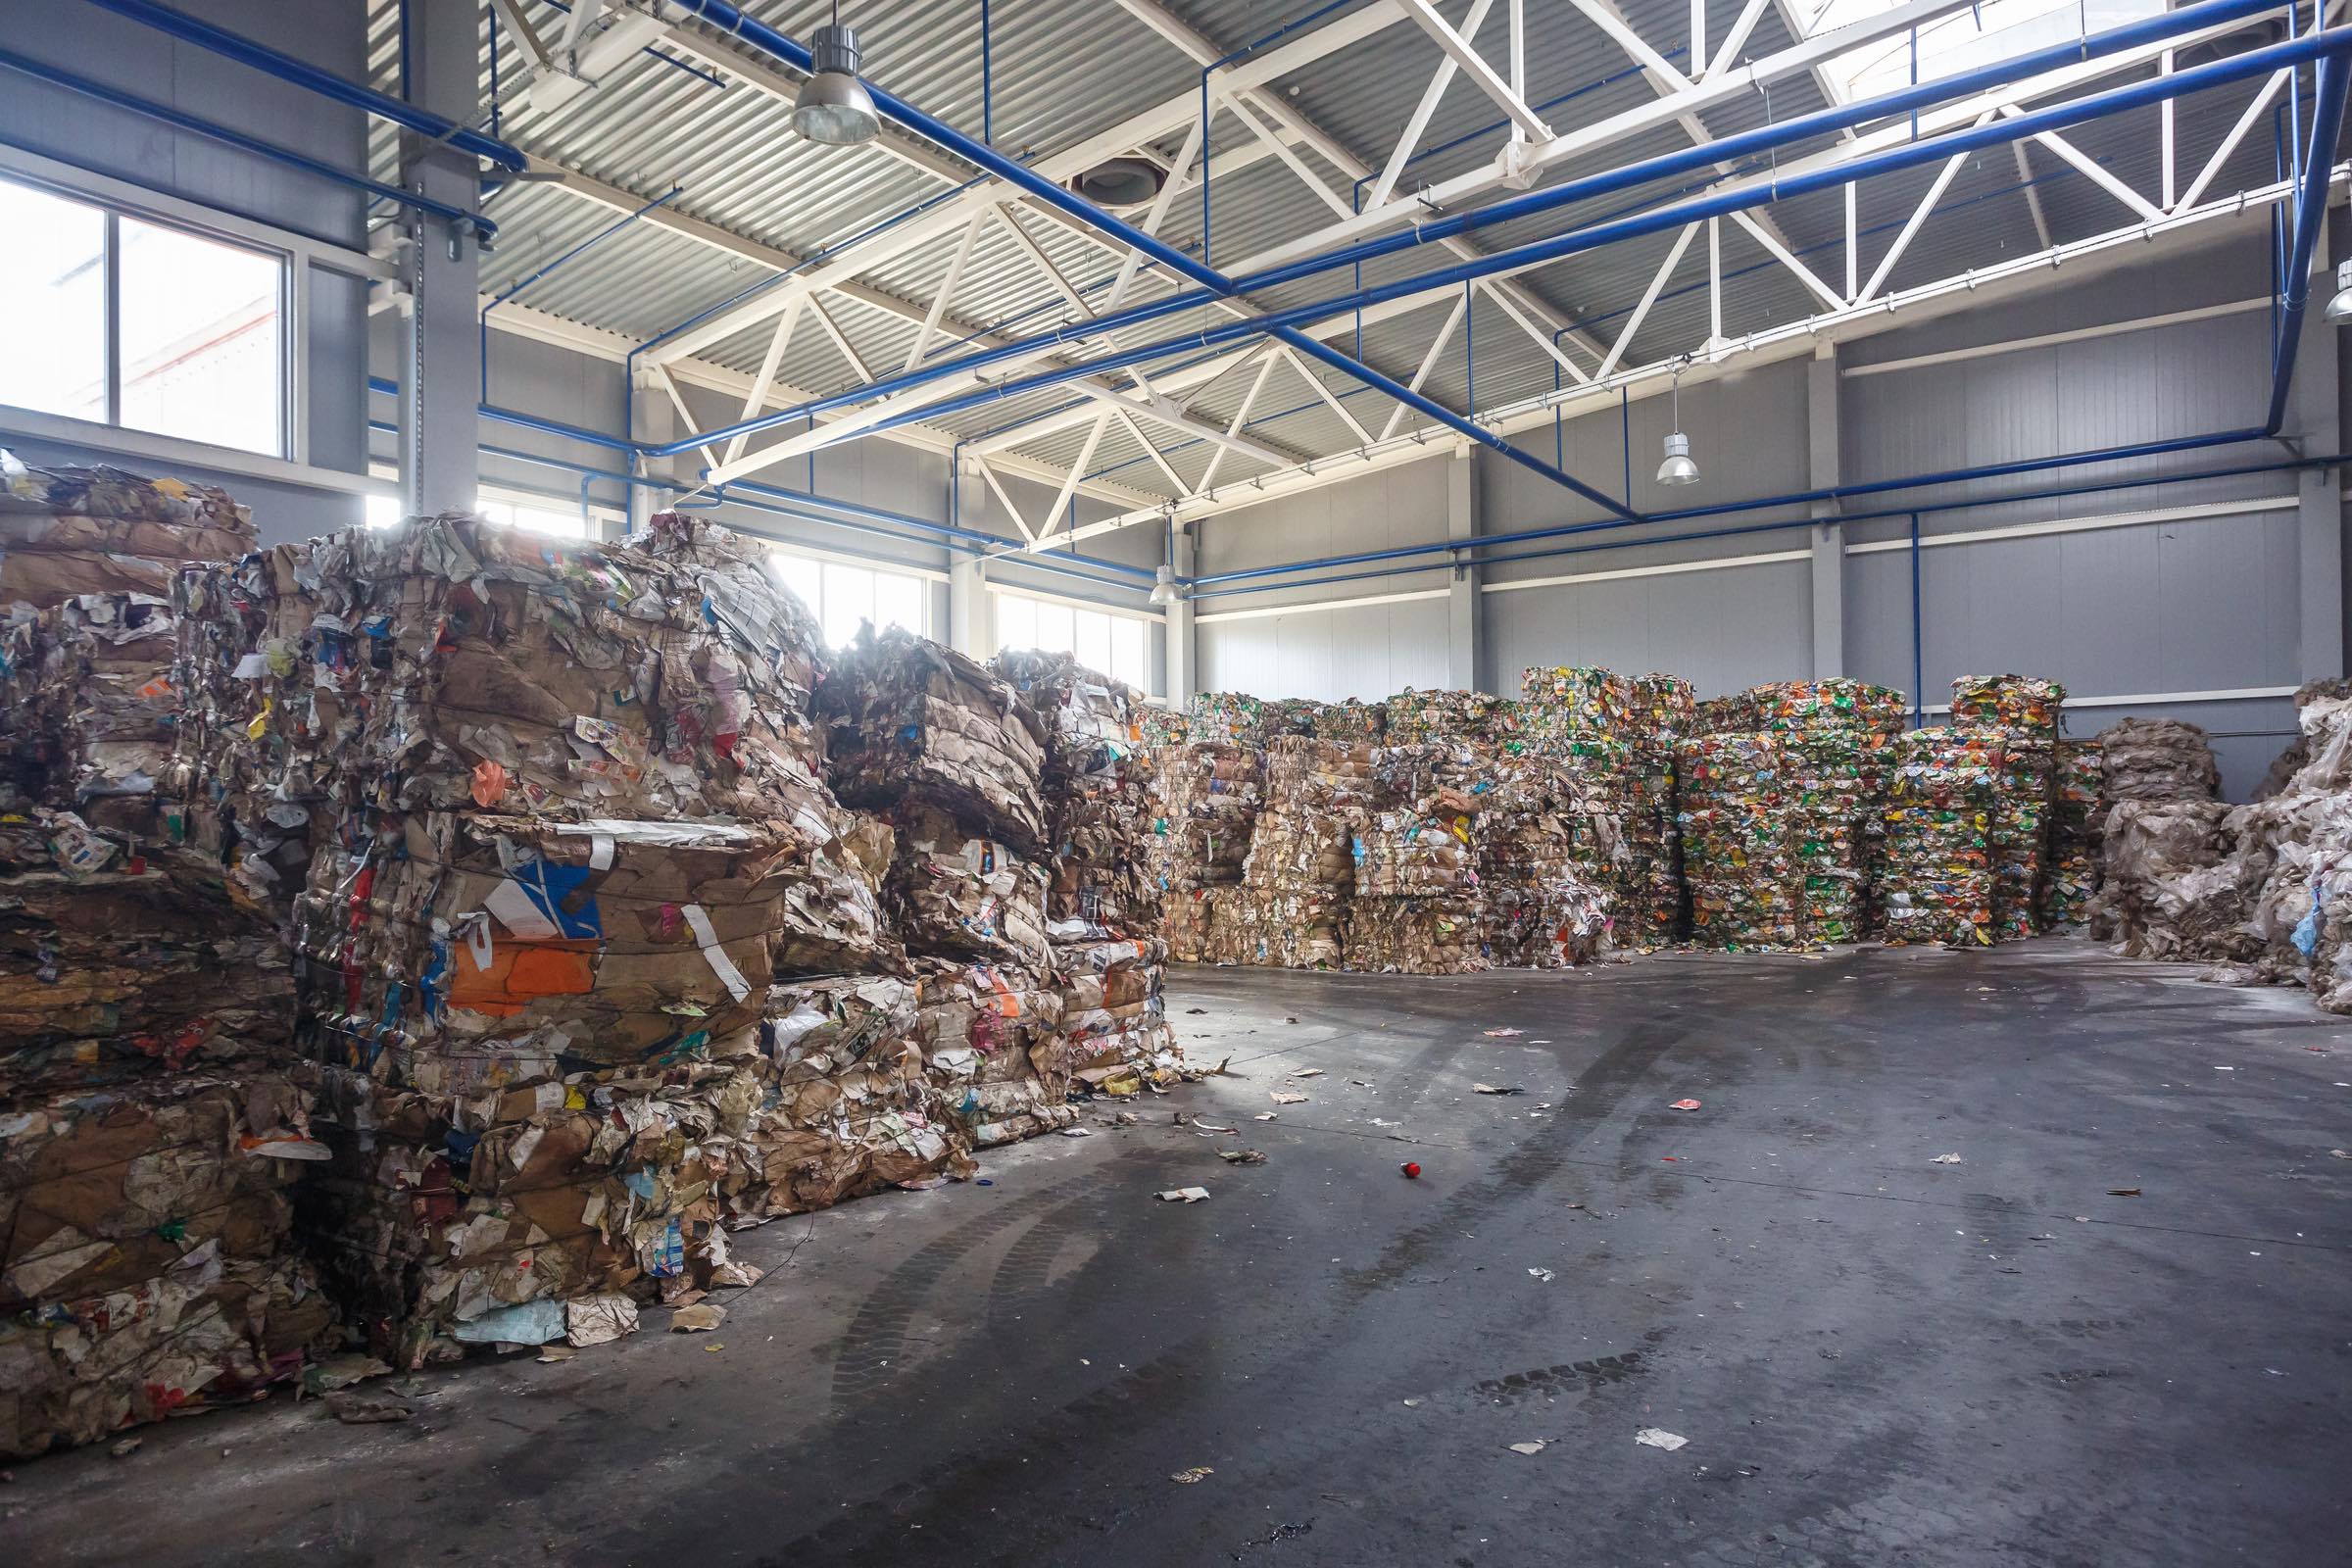 Plastic bales at a recycling facility